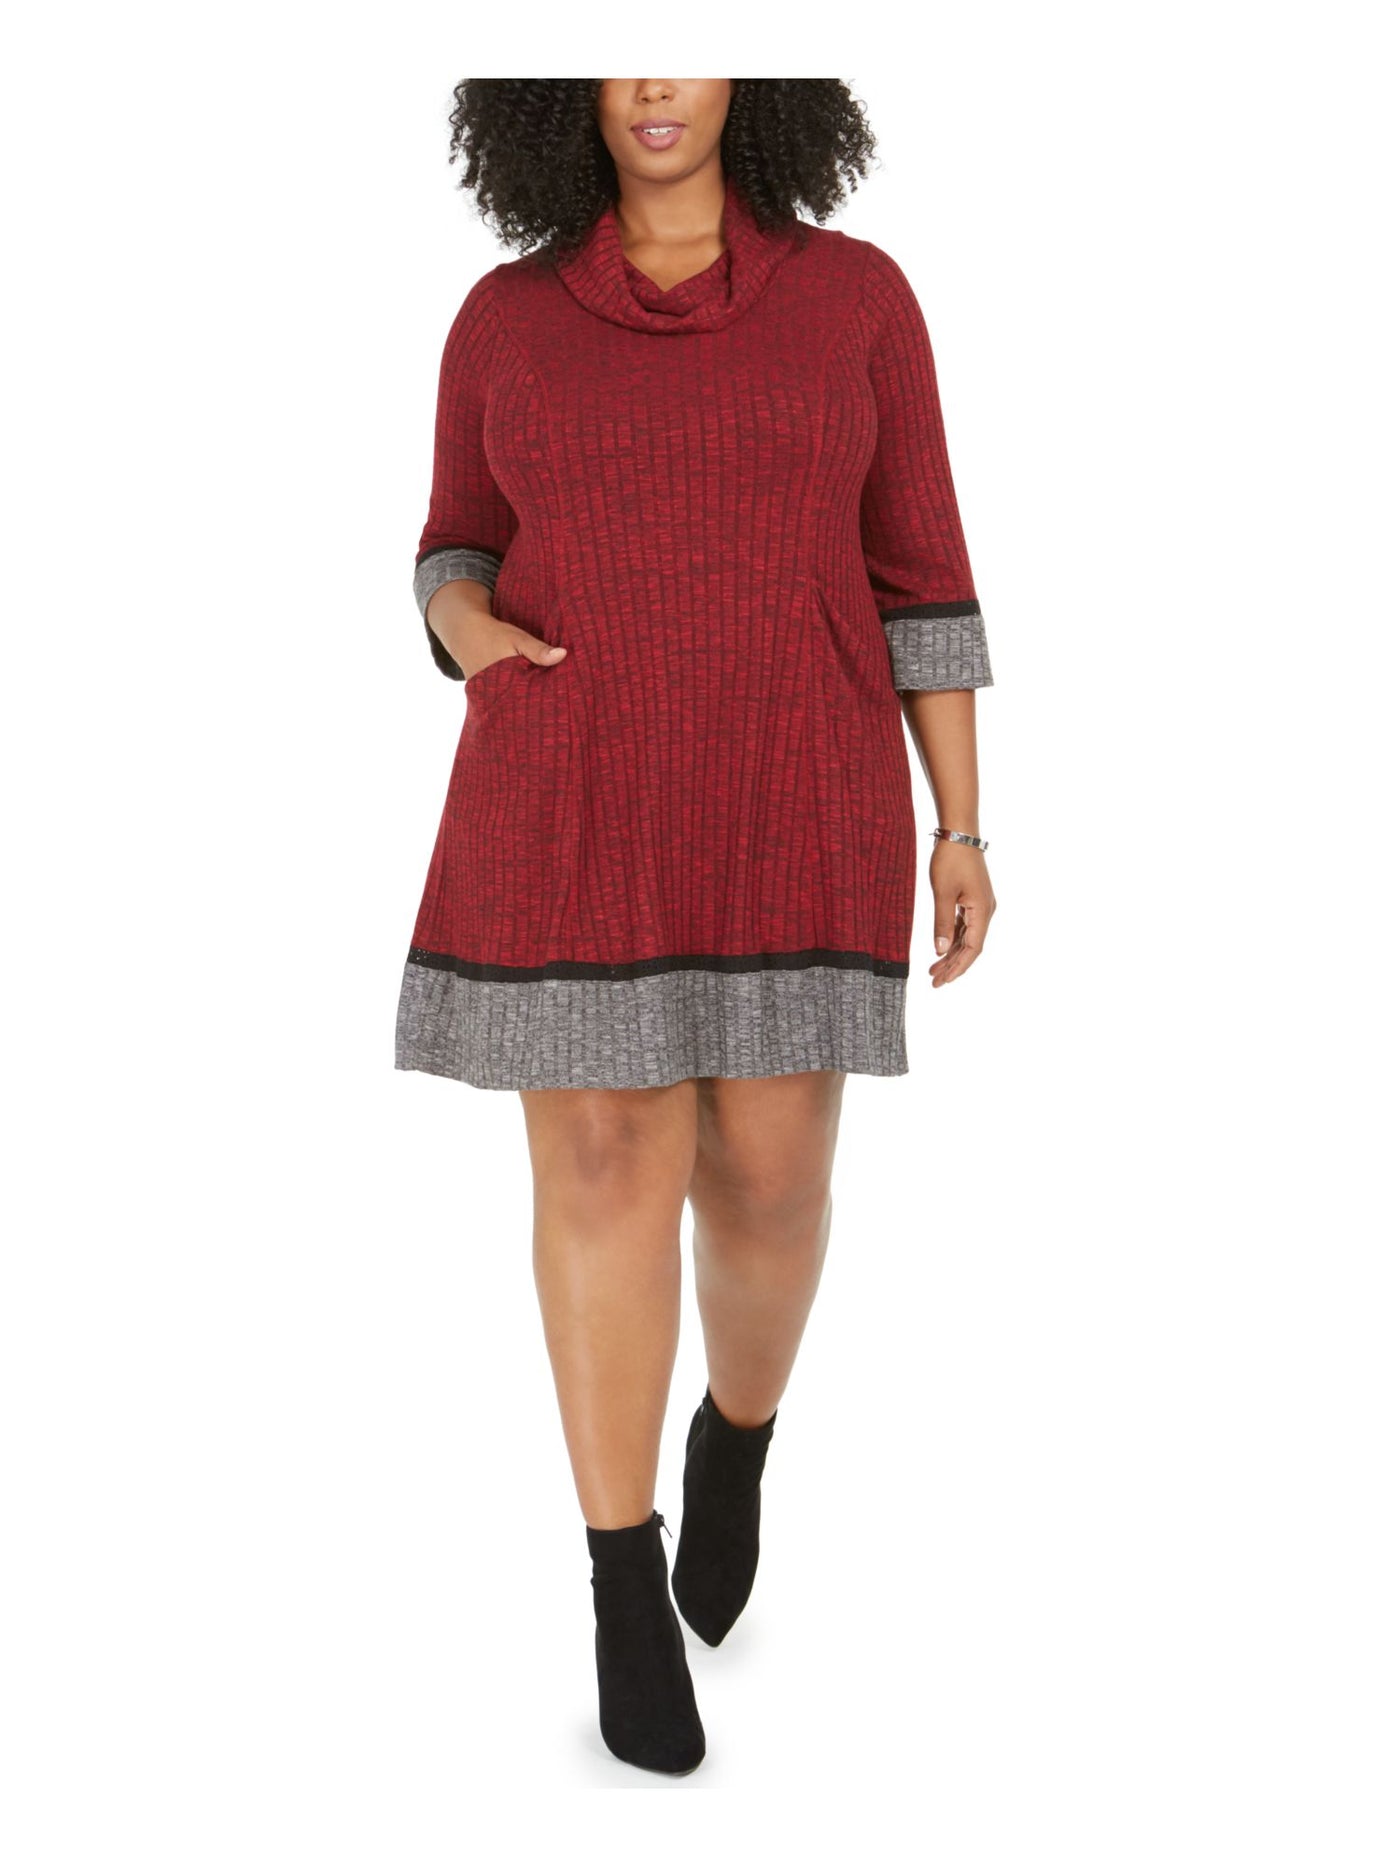 ROBBIE BEE Womens Red Knit Ribbed Pocketed Crochet Insets Unlined Heather 3/4 Sleeve Cowl Neck Above The Knee Sweater Dress Plus 3X